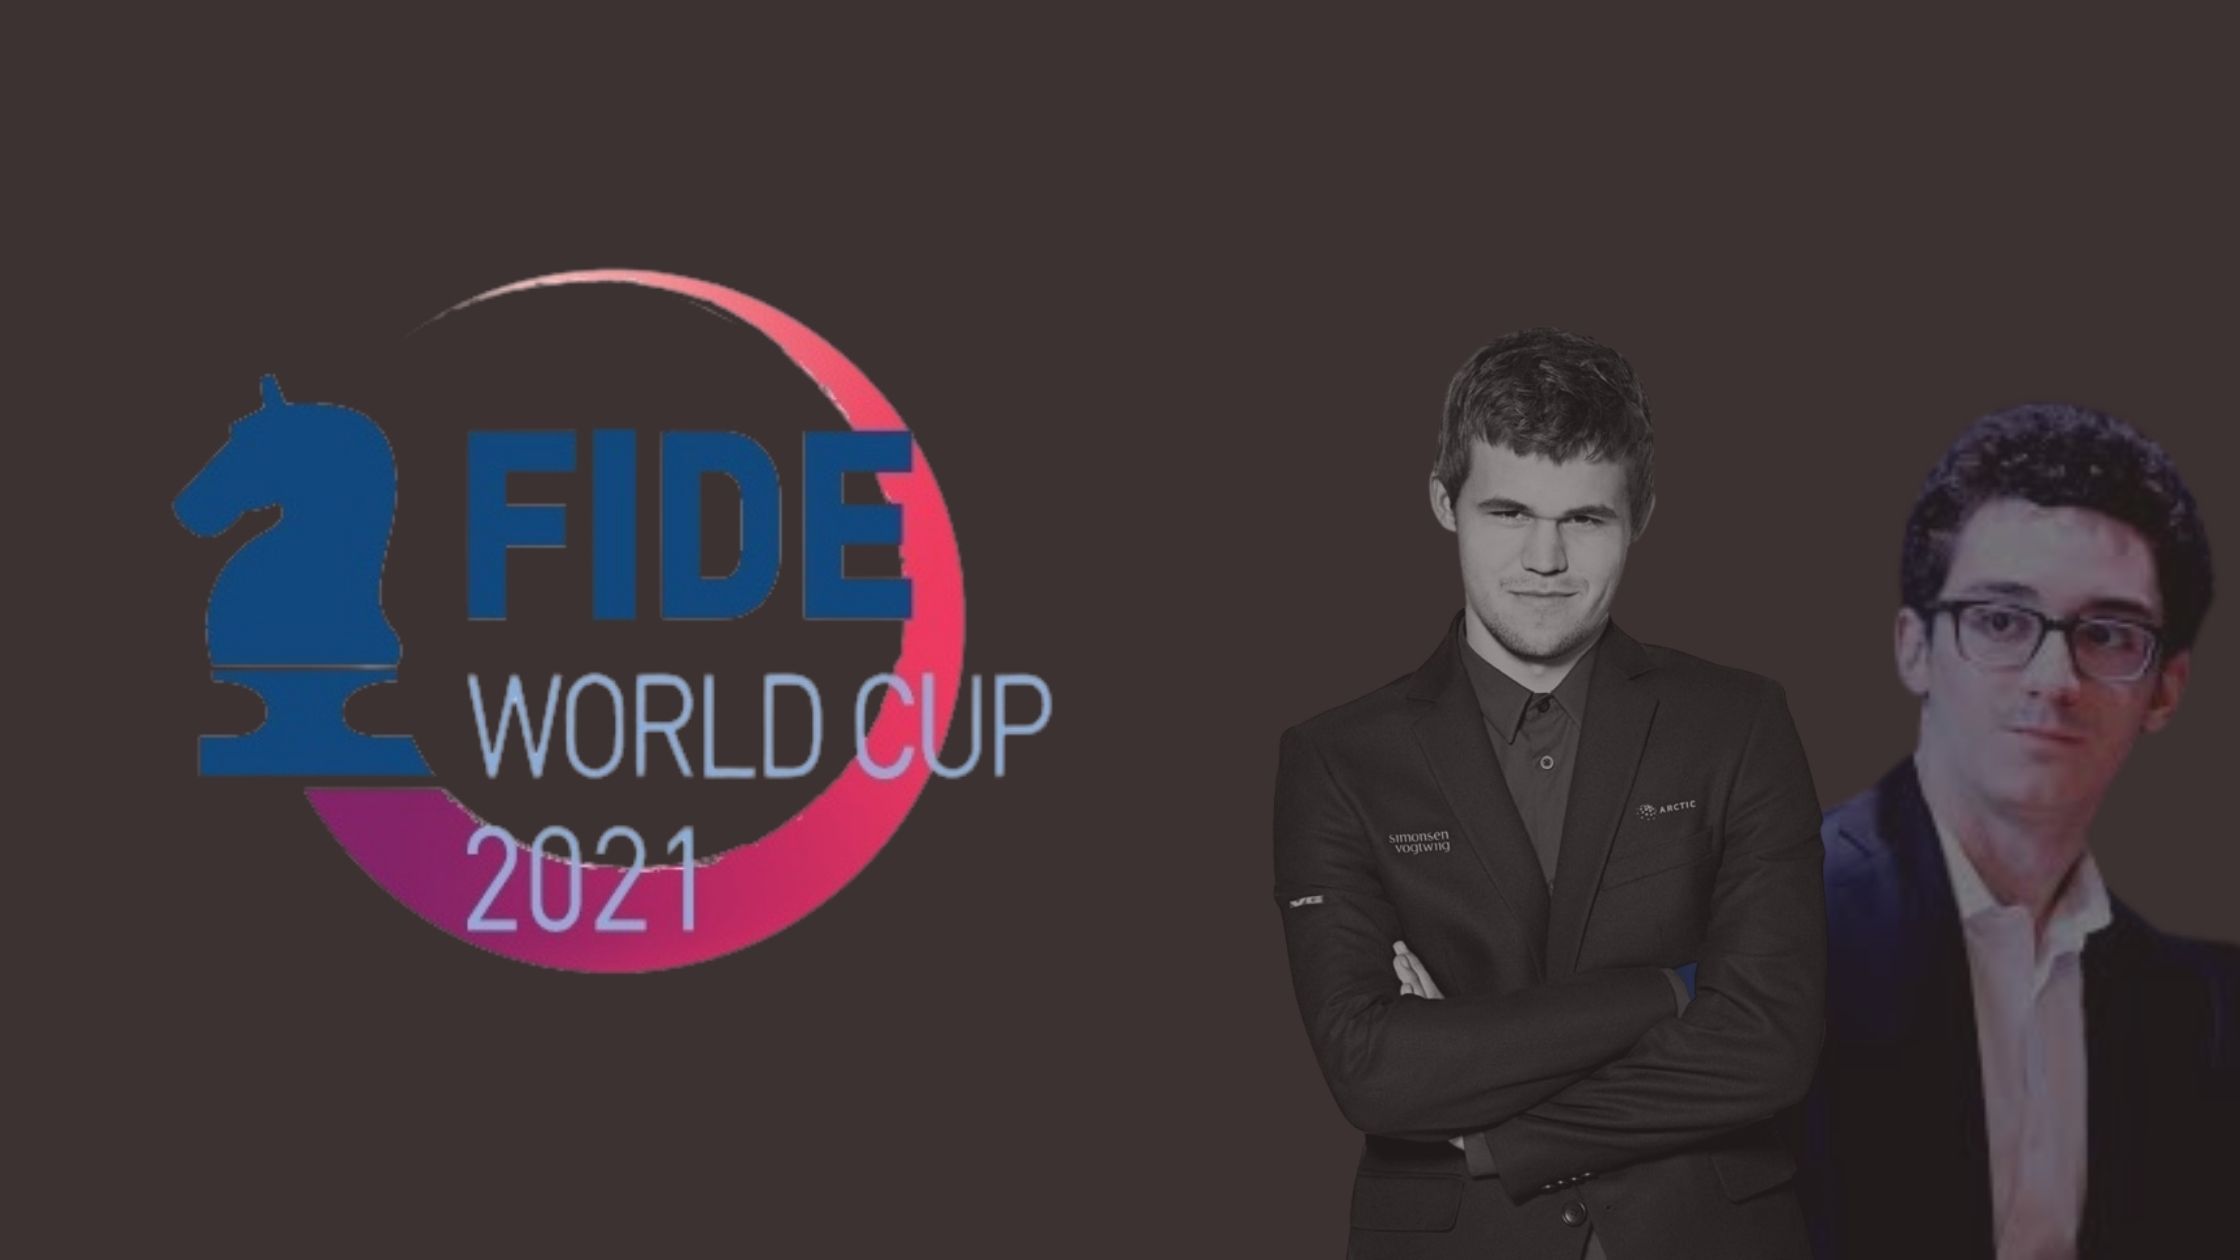 FIDE World Cup 2021 The Biggest Event on the Chess Calendar CHESS KLUB